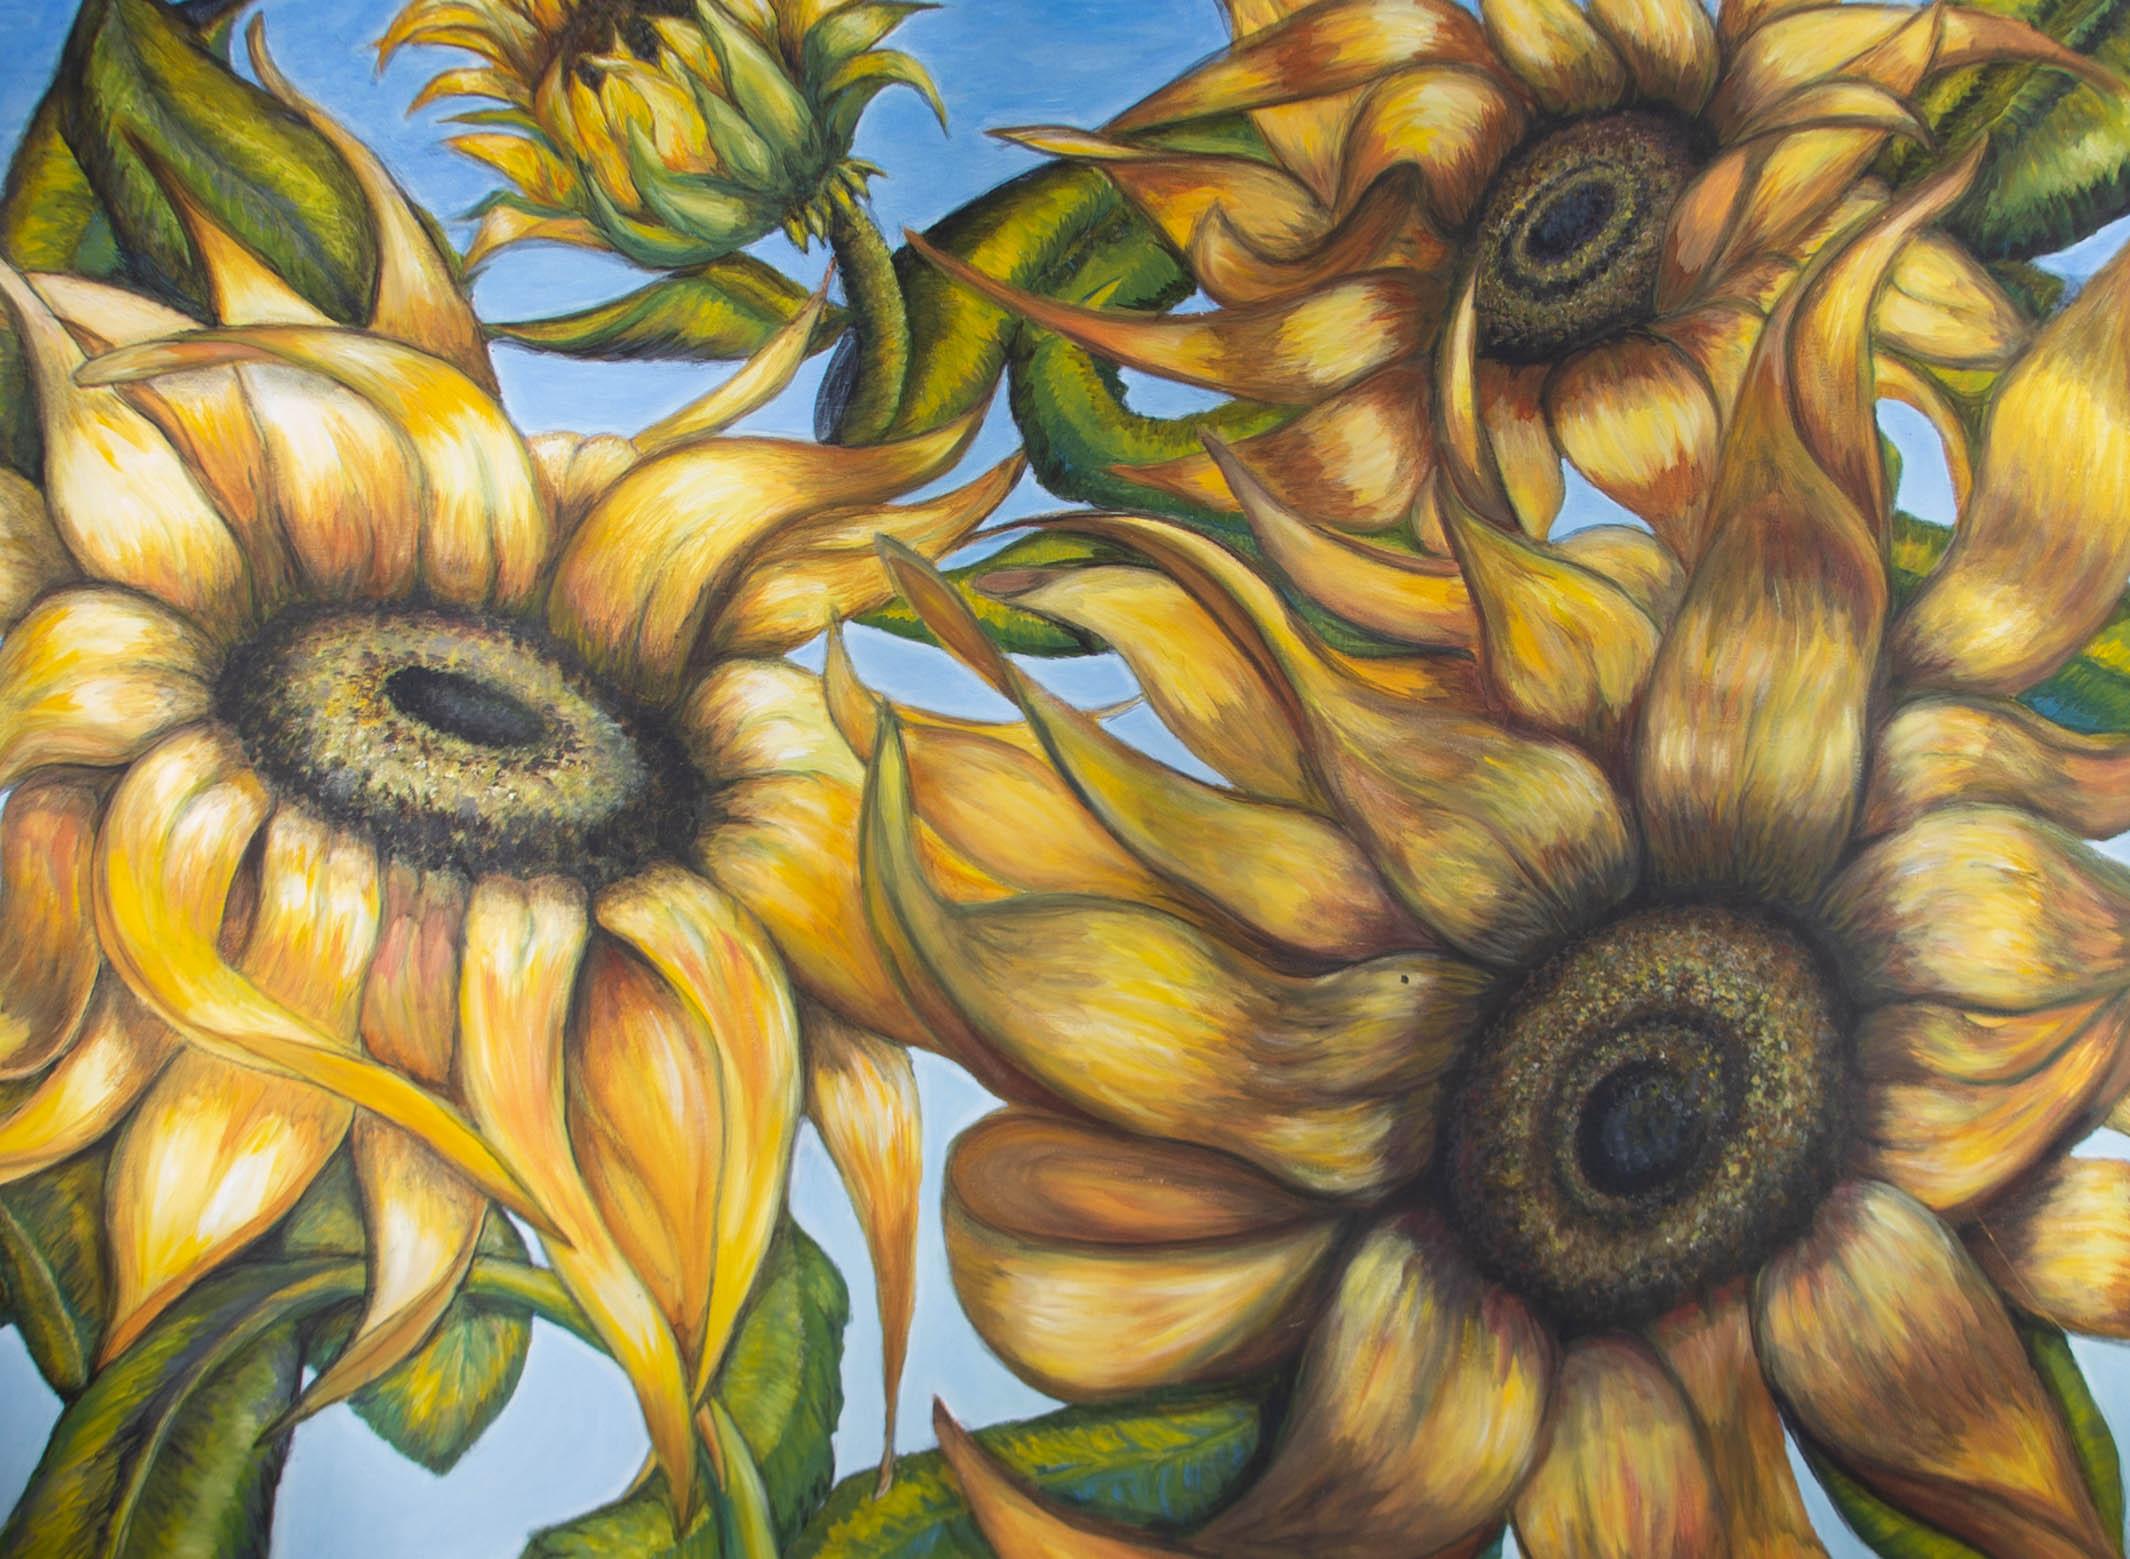 Unknown Still-Life Painting - 2011 Acrylic - Giant Sunflowers